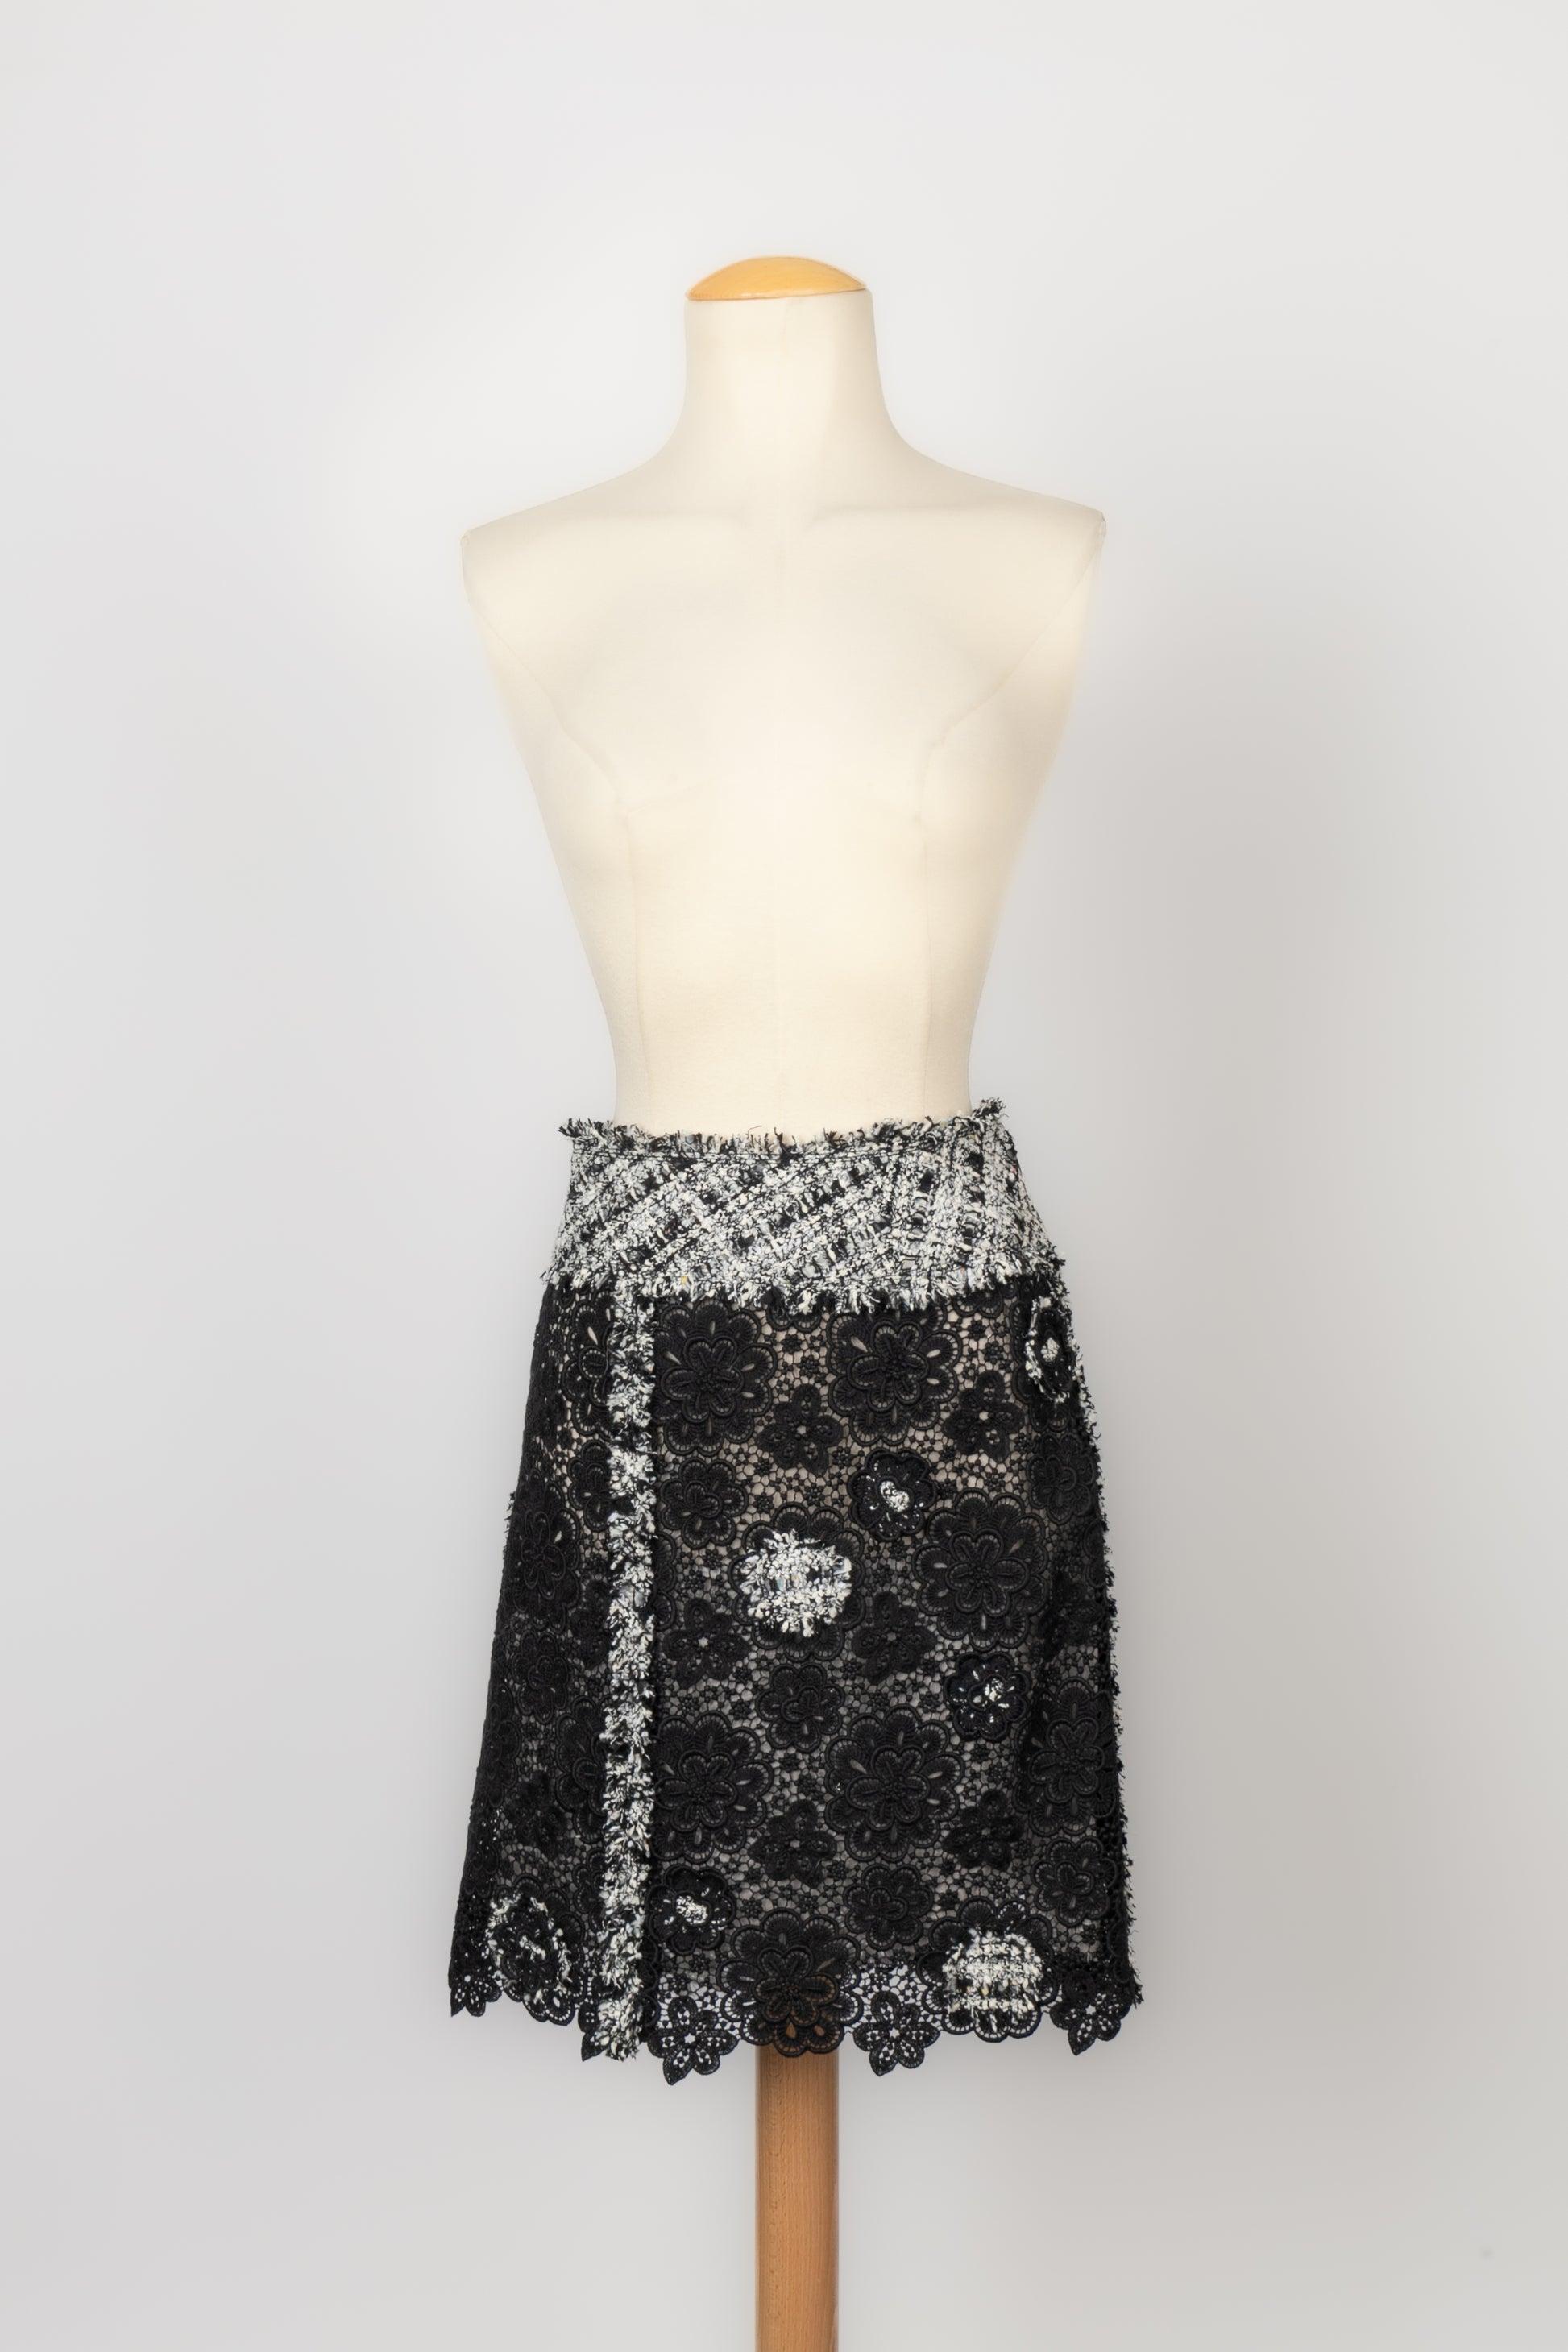 Chanel Black Lace Set Edged with Braids, 2004 6